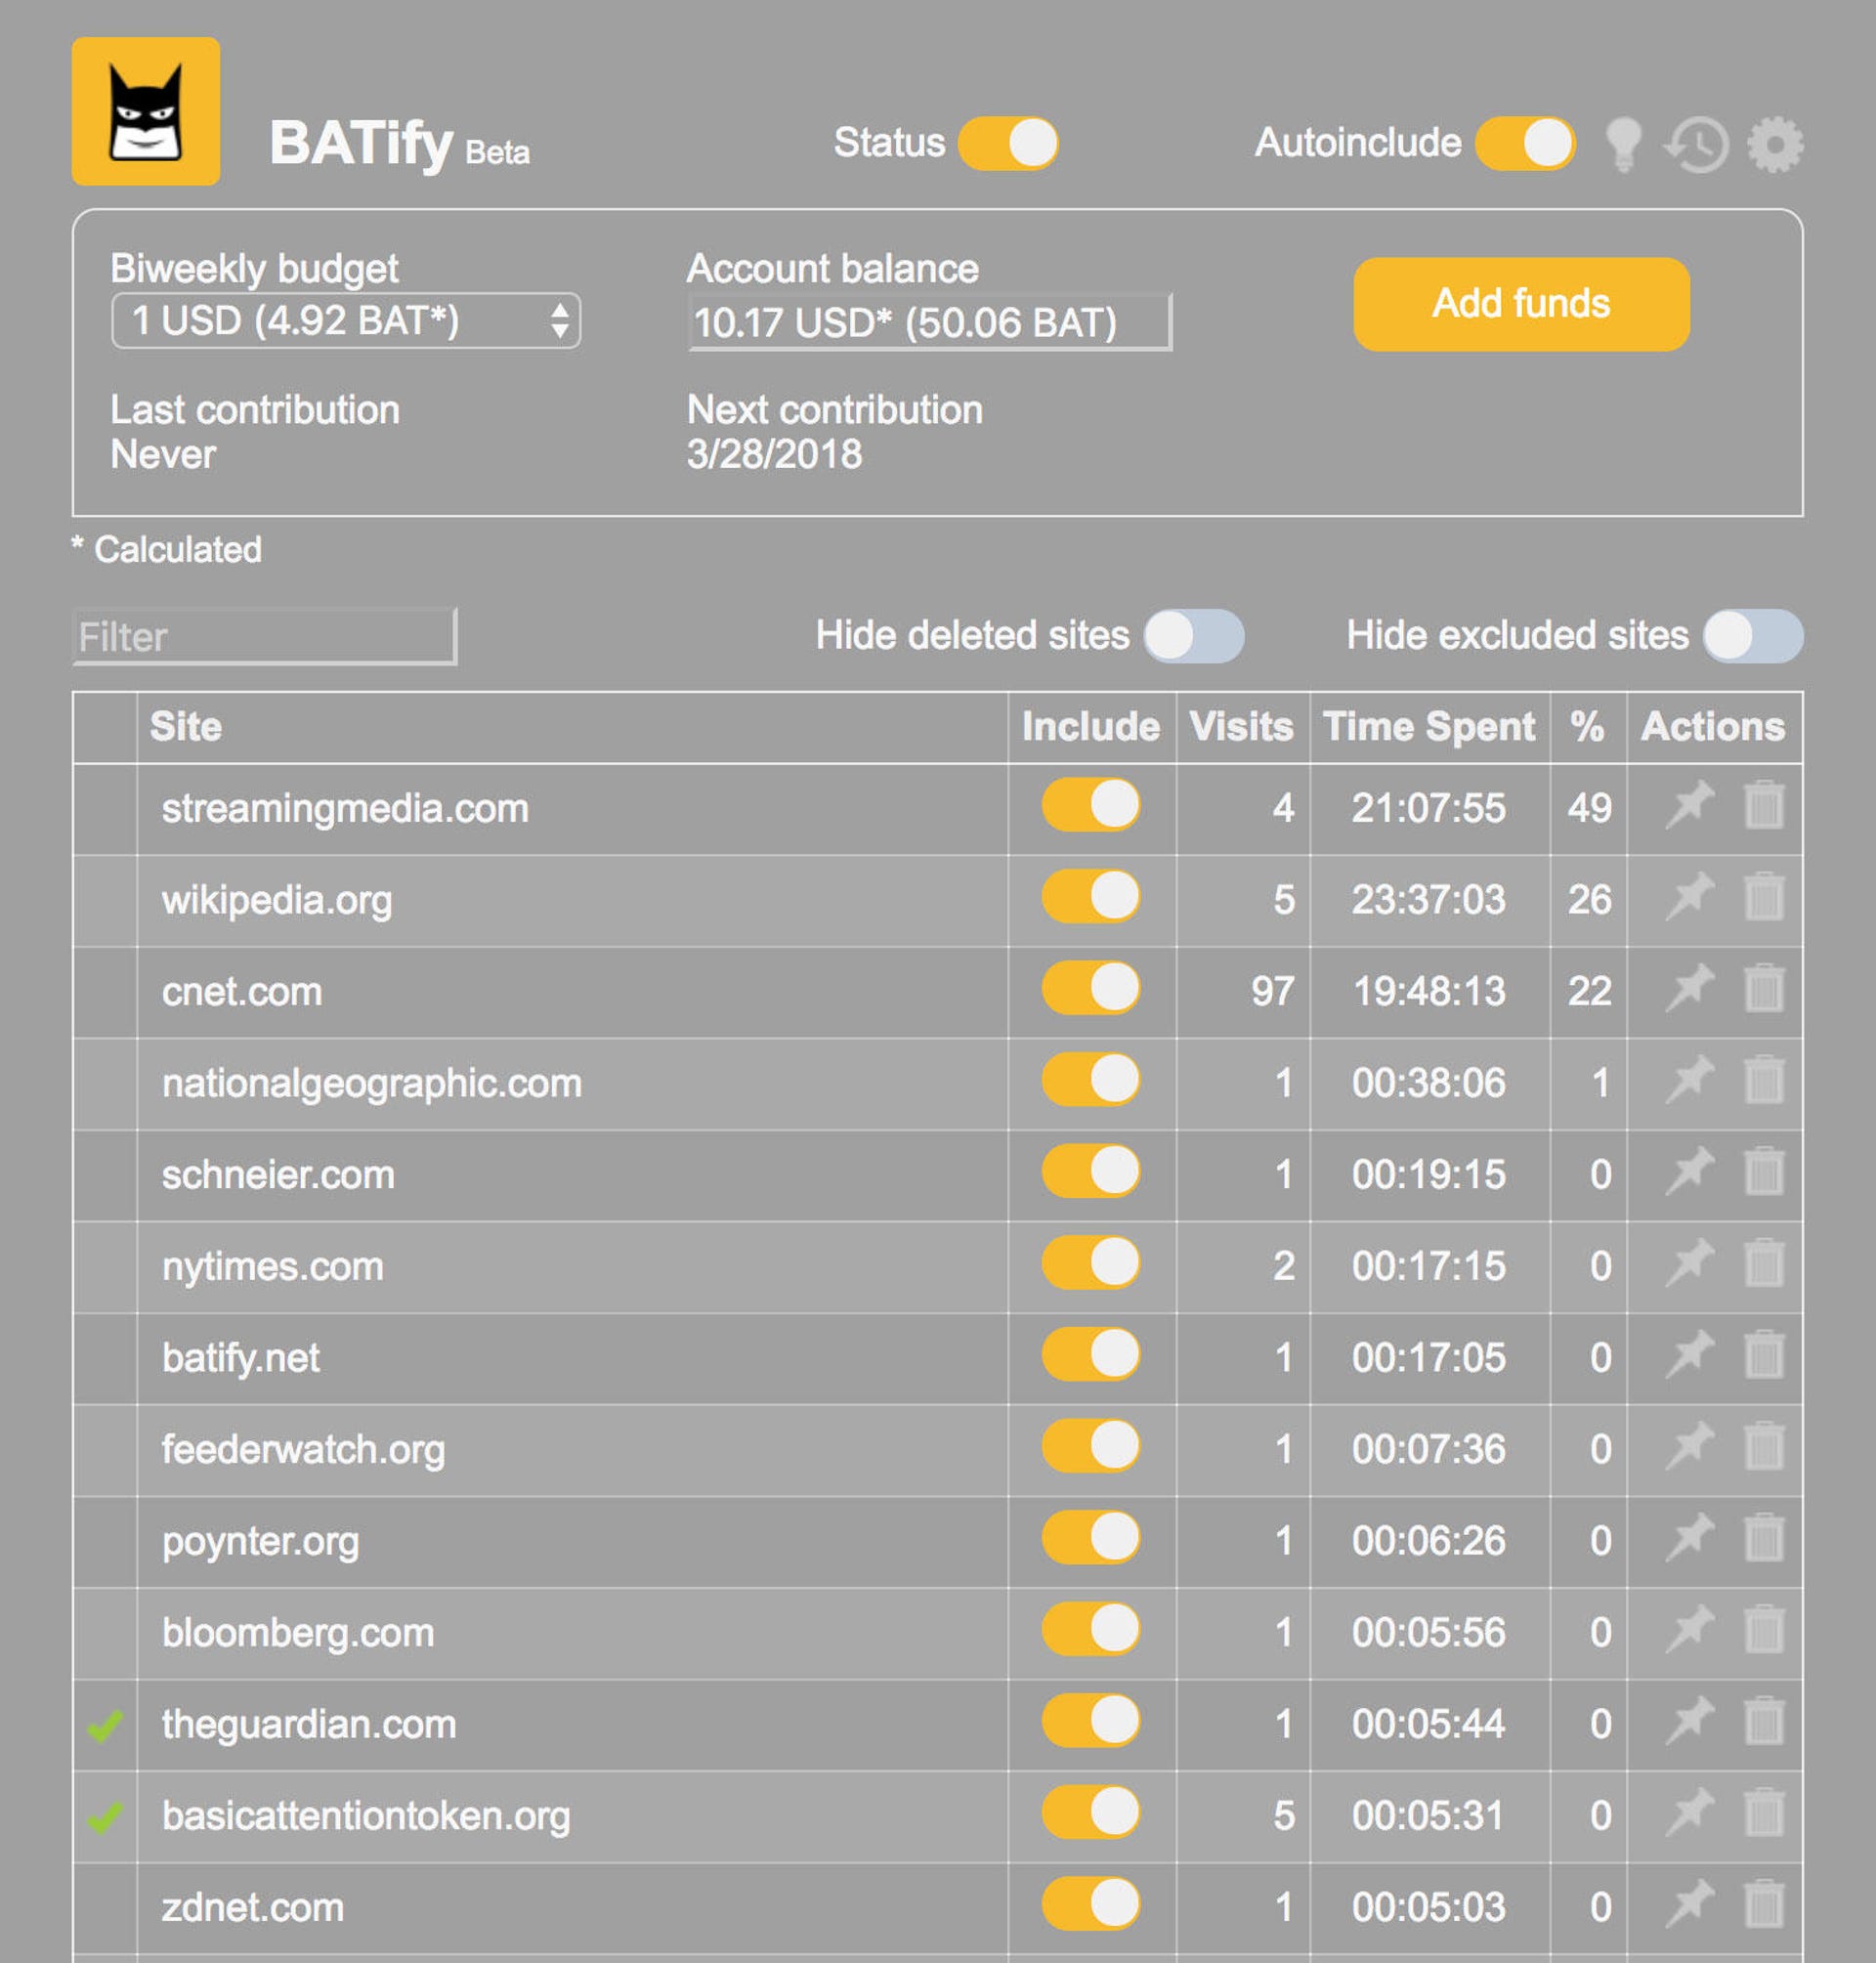 The Batify Chrome extension pays publishers you donate to using the basic attention token system developed by browser startup Brave Software.